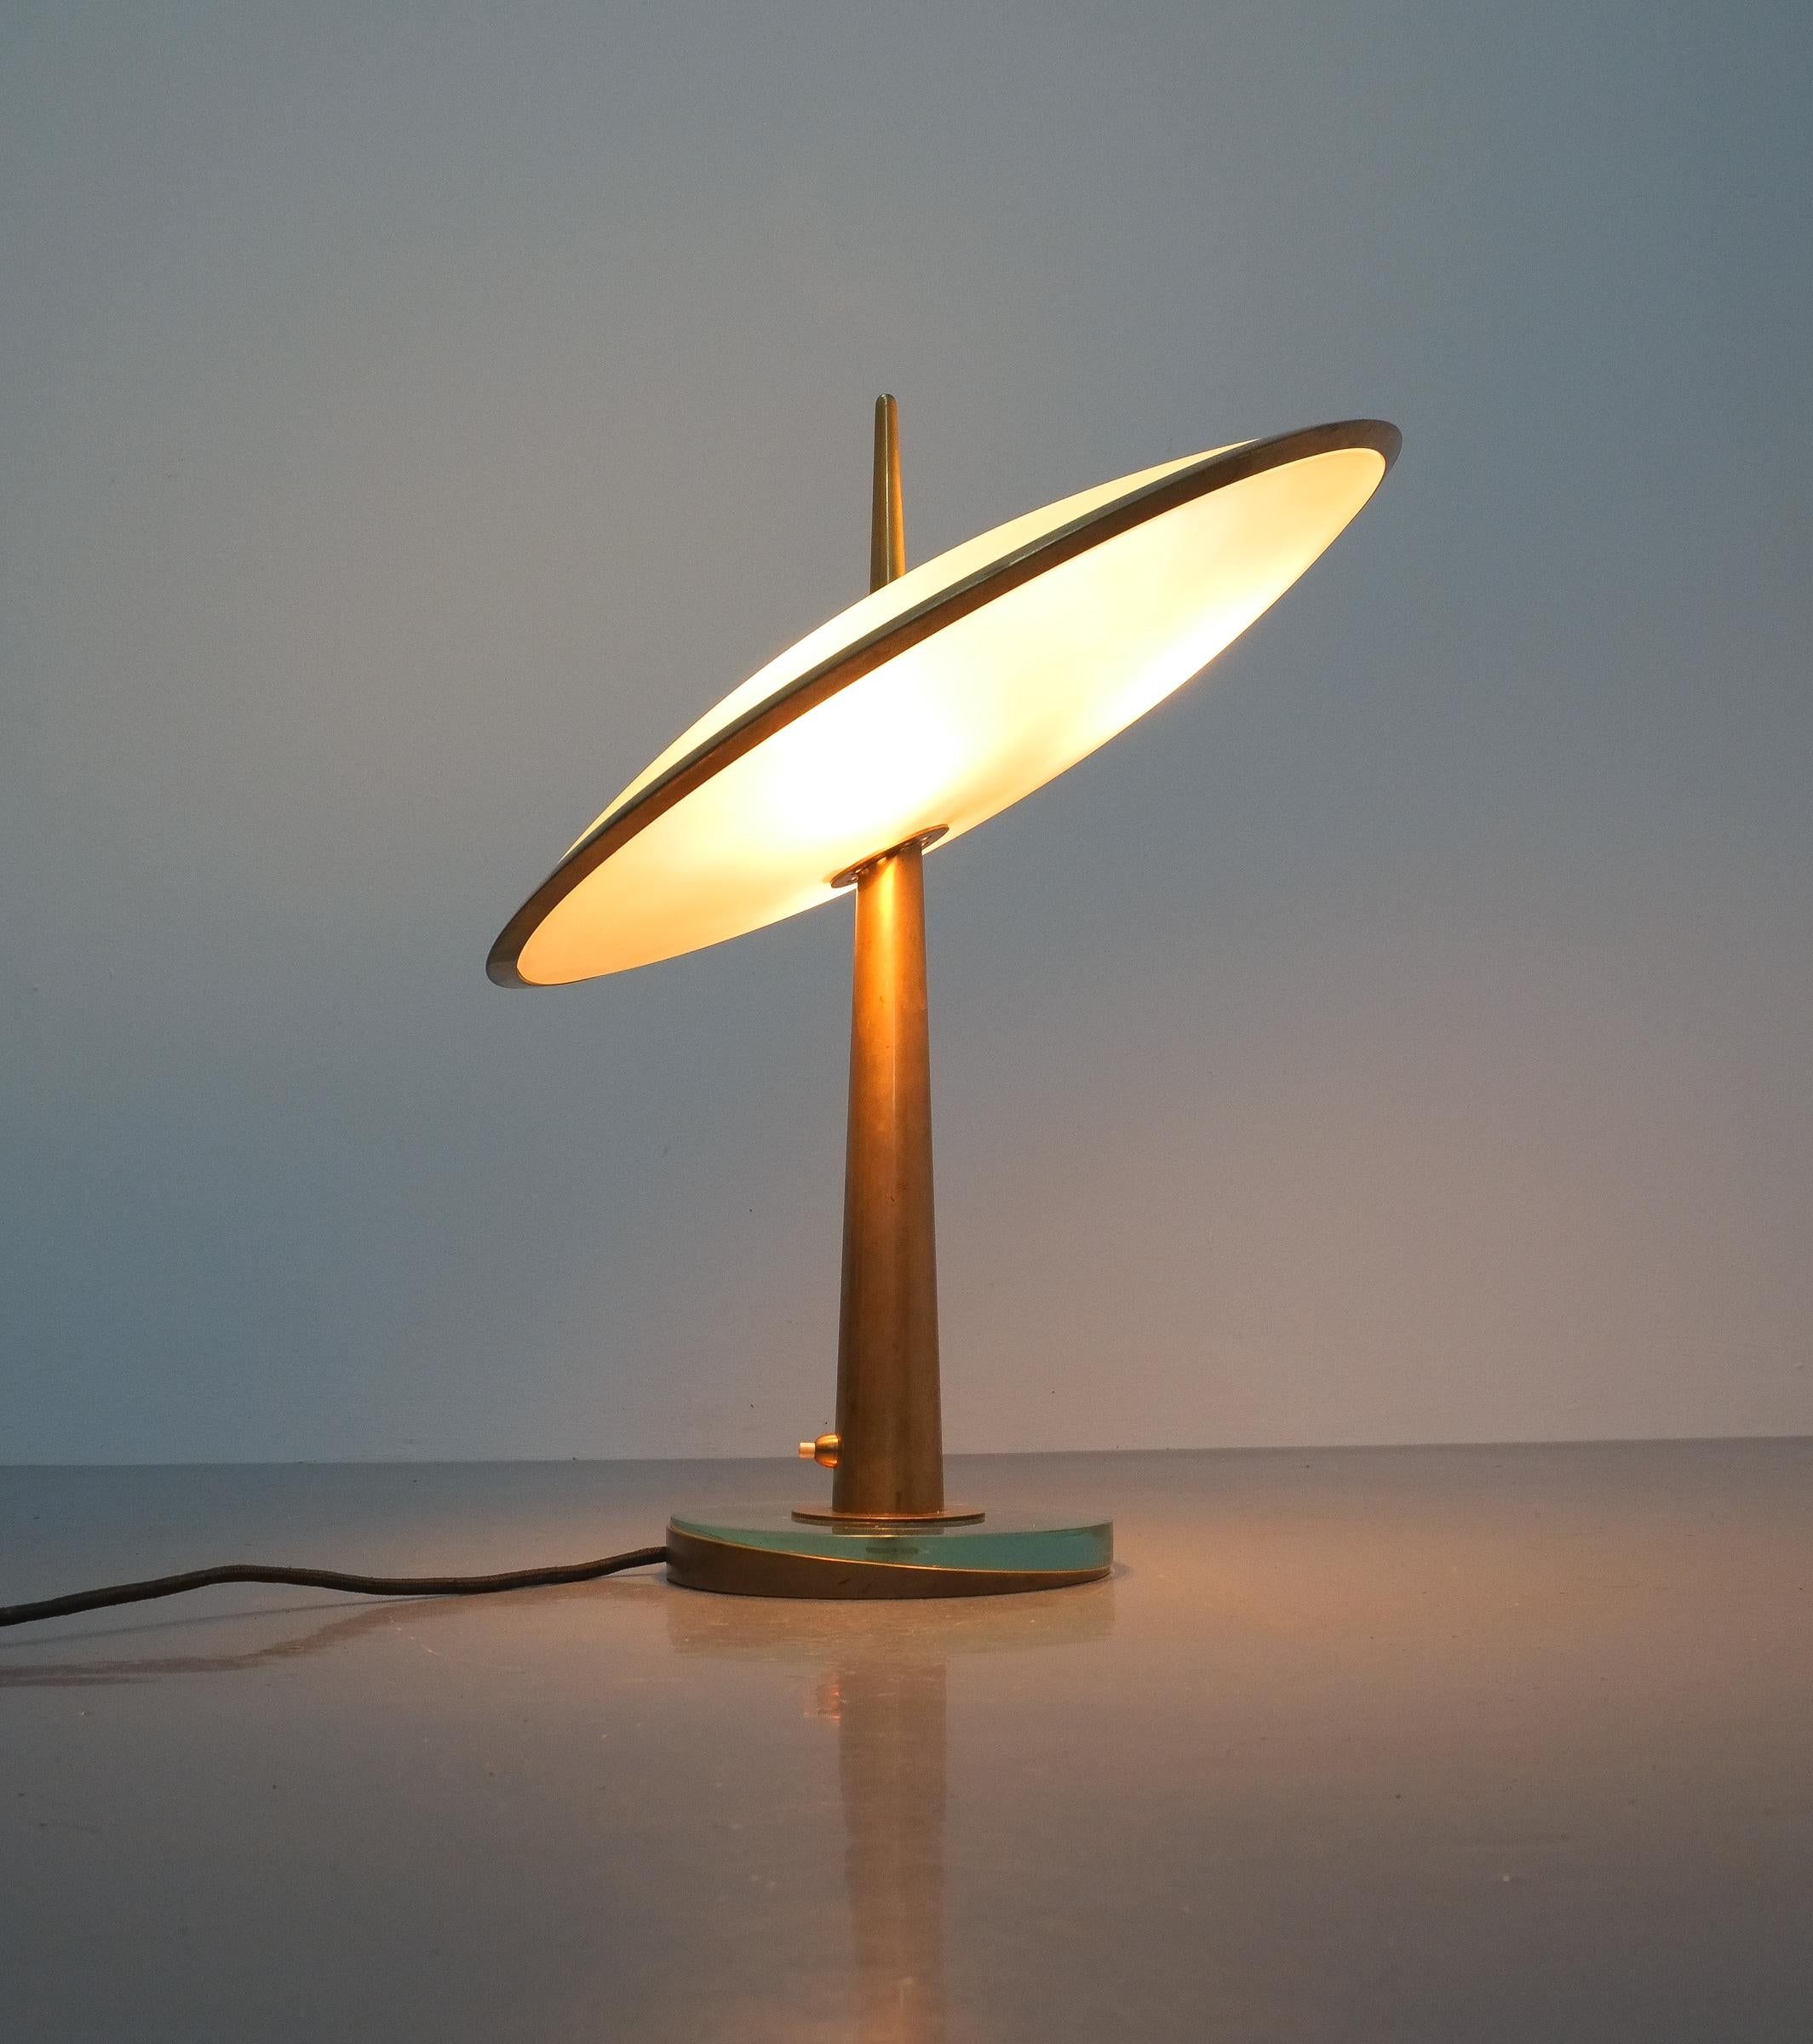 This lamp is on sale until the end of December only.

Rare max Ingrand Fontana Arte Disco Volante Mod. 1538, Italy, 1955. Formidable iconic table light with many astonishing details such as a solid brass rim connecting the 2 colored and etched blue